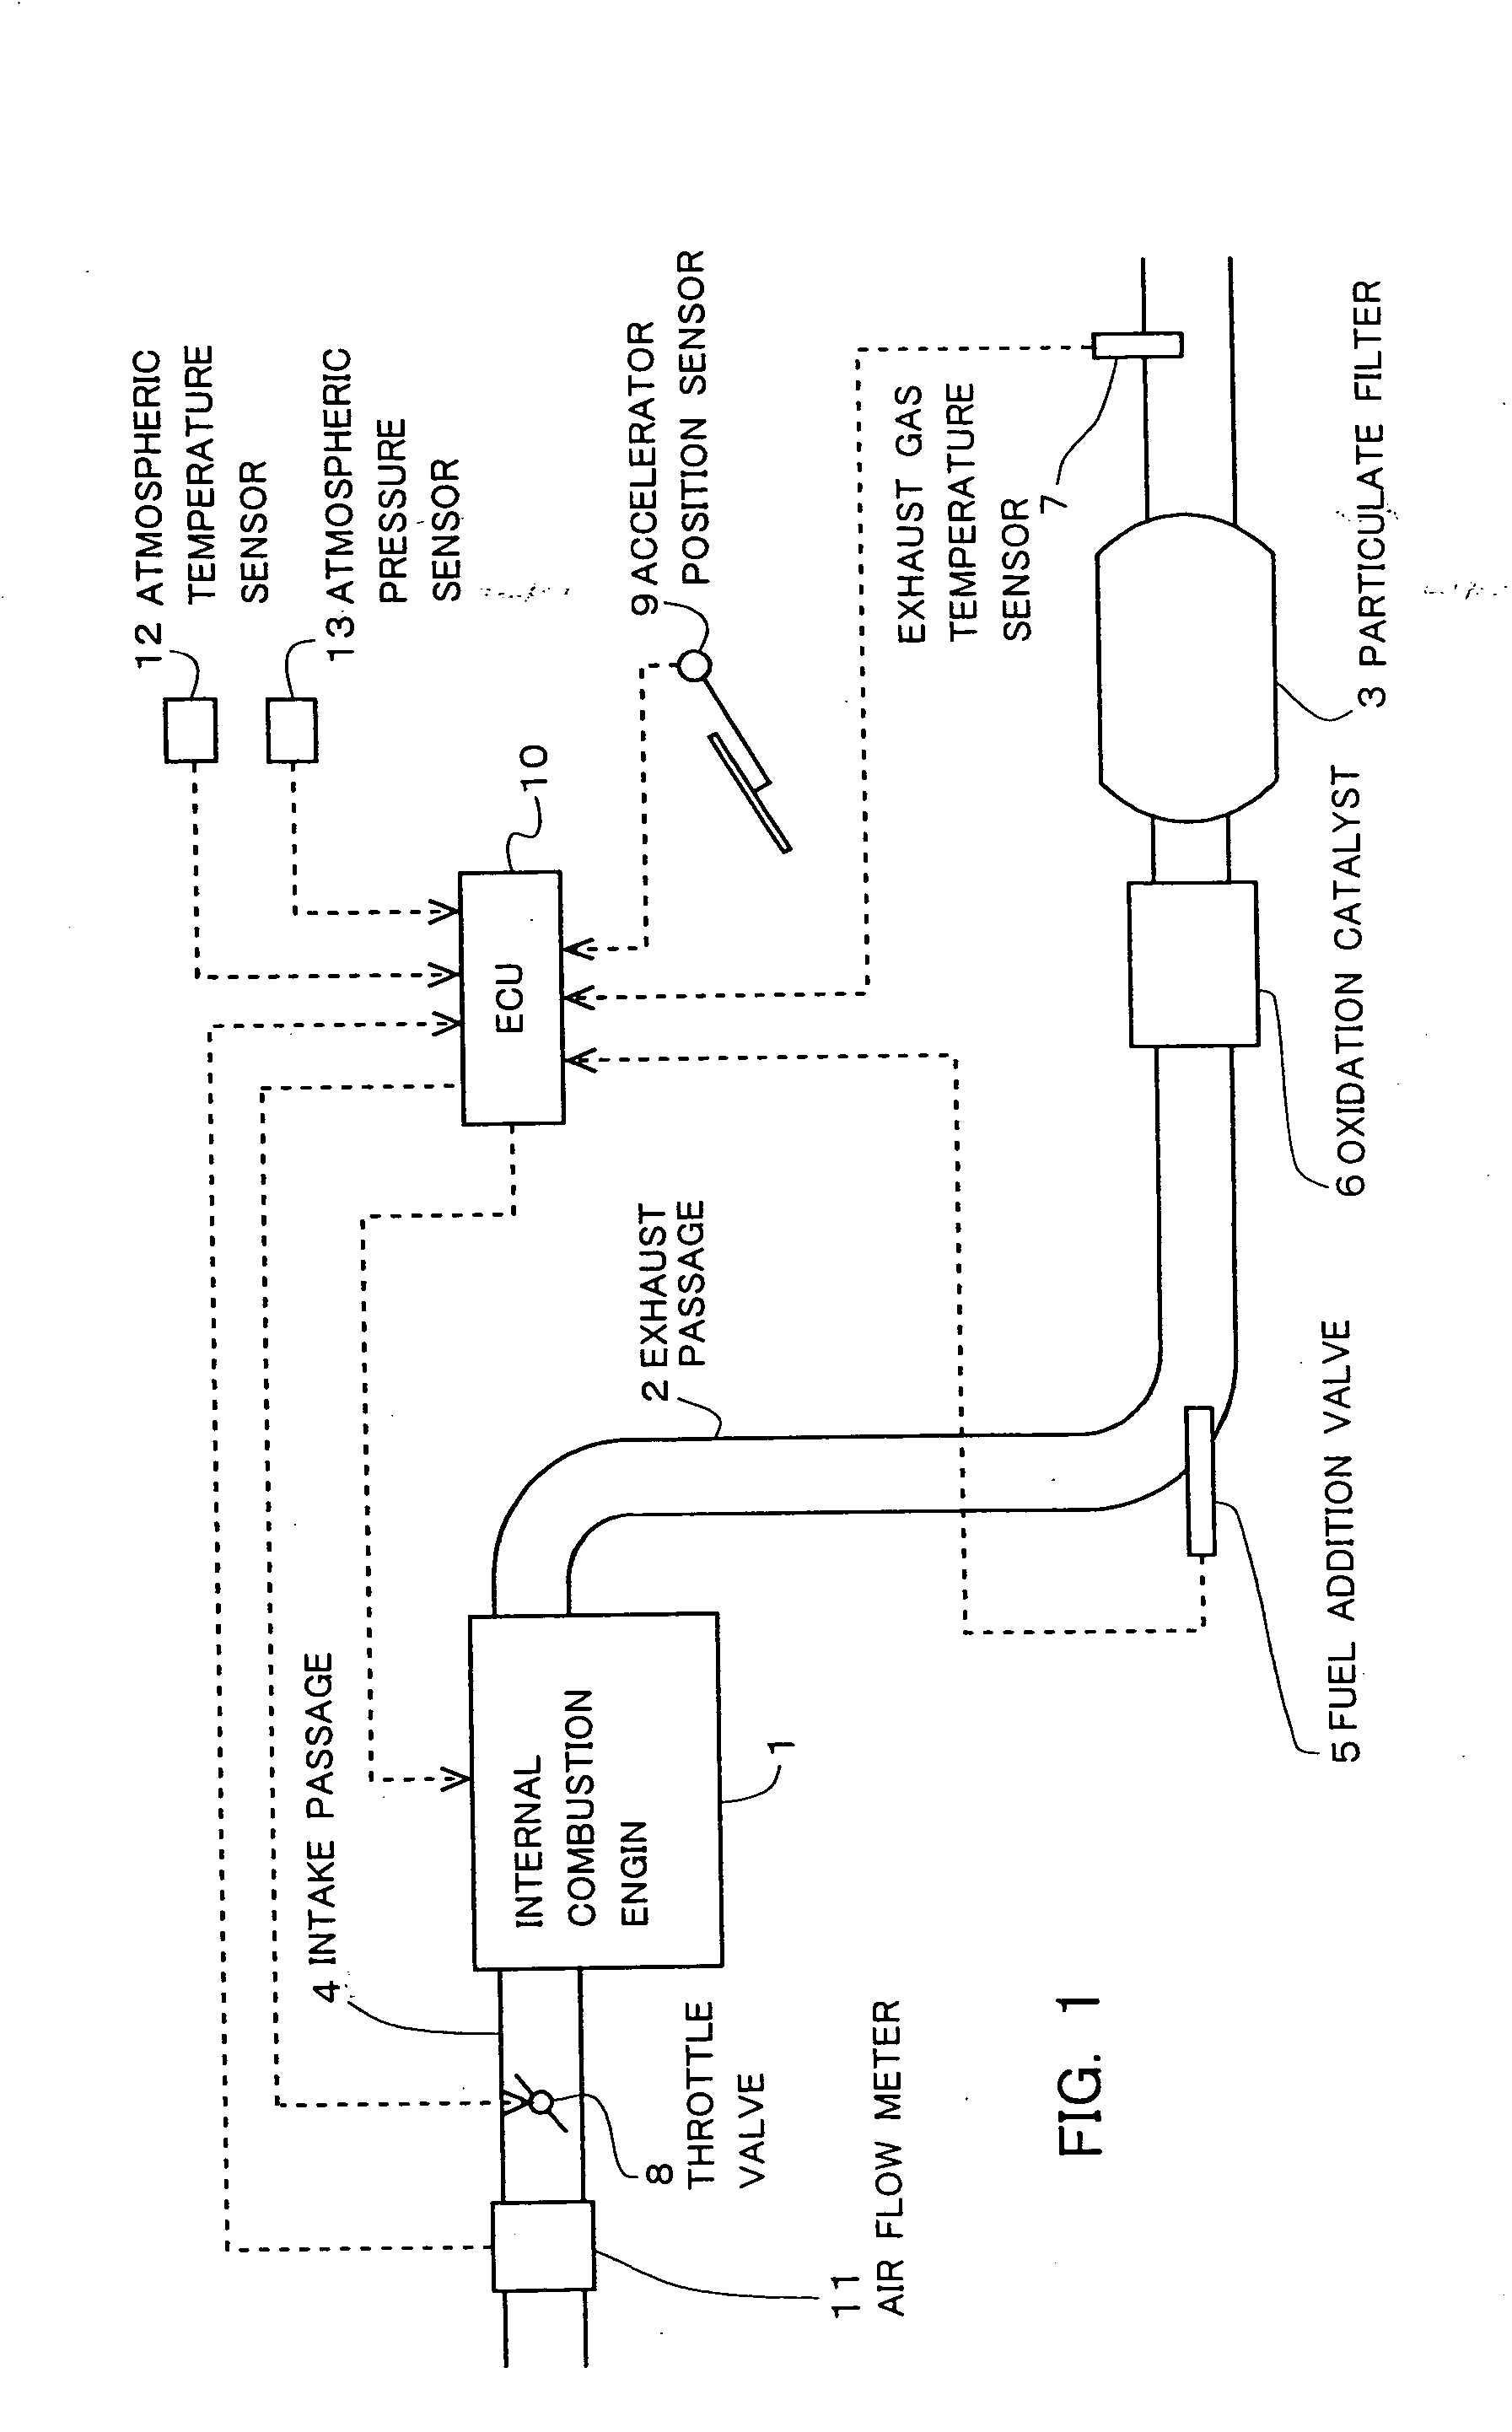 Method for restricting excessive temperature rise of filter in internal combustion engine